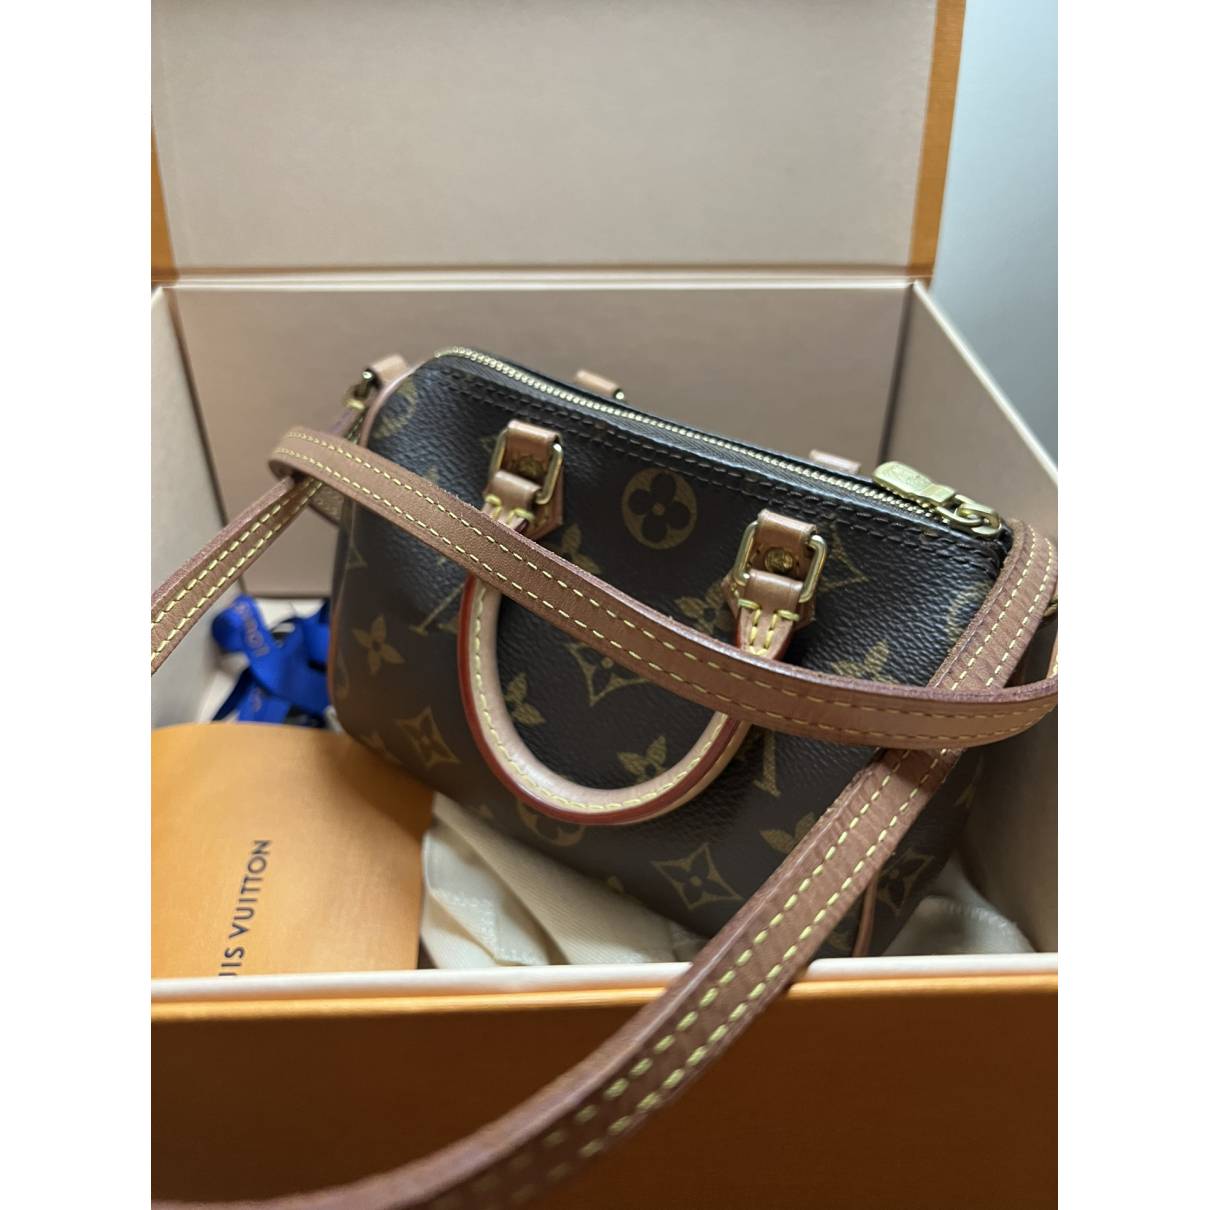 Louis Vuitton - Authenticated Nano Speedy / Mini HL Handbag - Patent Leather Brown for Women, Very Good Condition